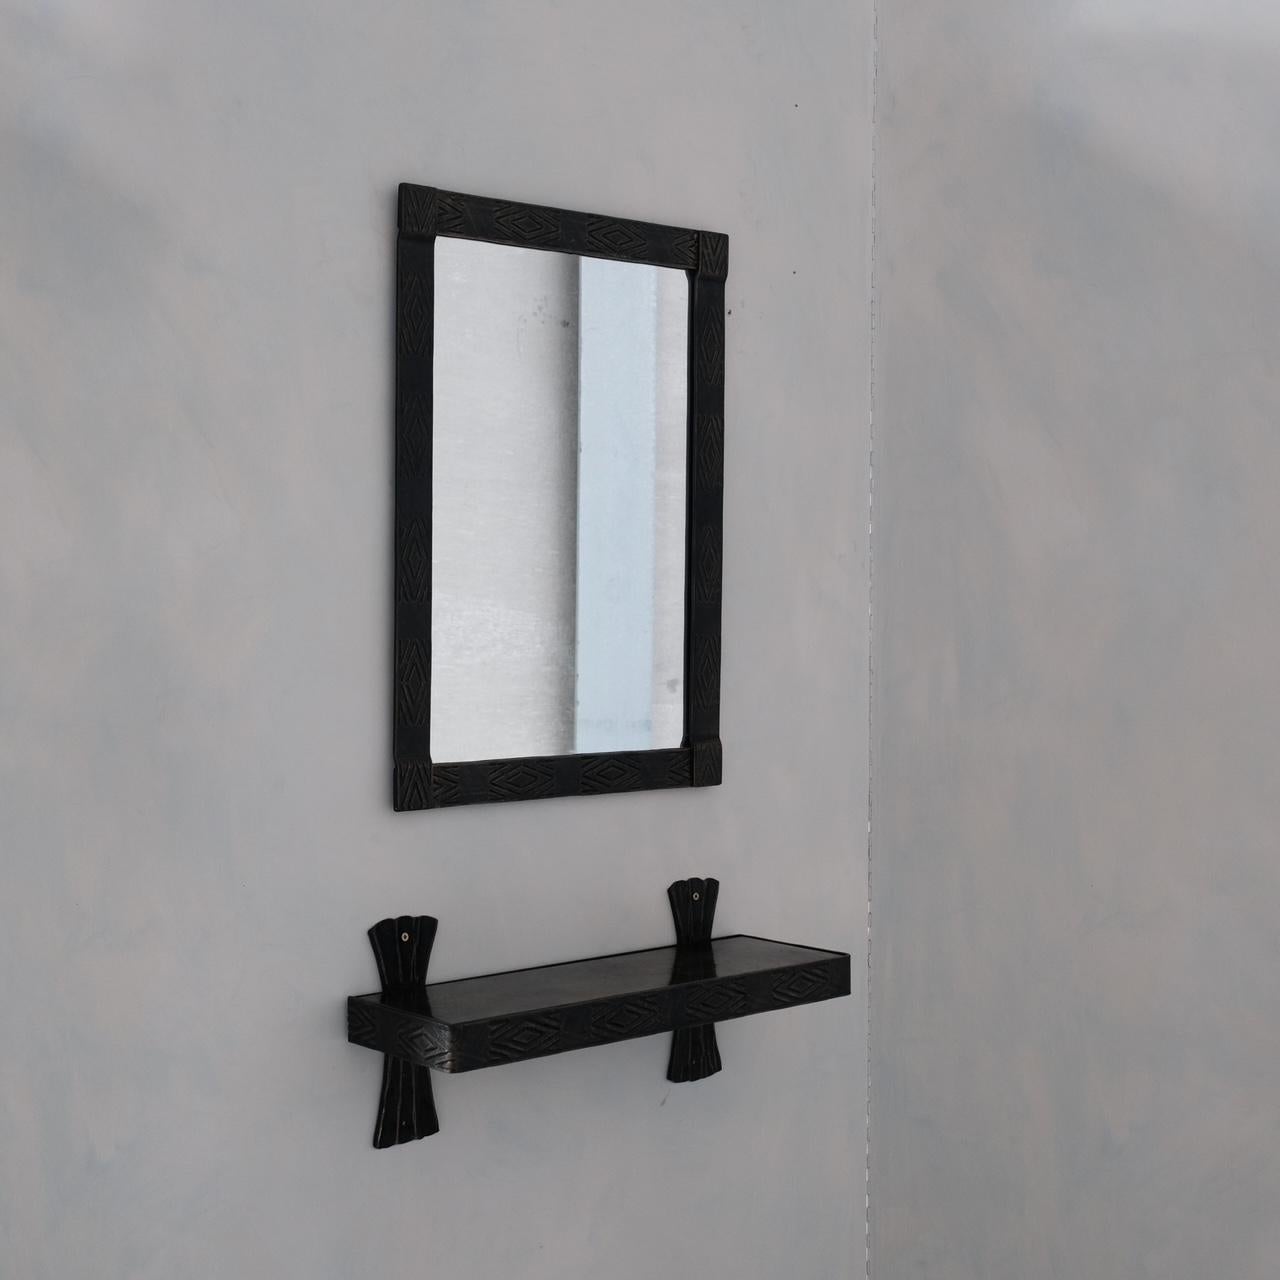 A good brutalist style mirror, with unusual wall shelf. 

Belgium, c1970s. 

The iron mirror is well formed and decorative and is the piece to have,

The shelf perhaps wants ignoring but could be a useful pairing, the shelf tray is a thin metal